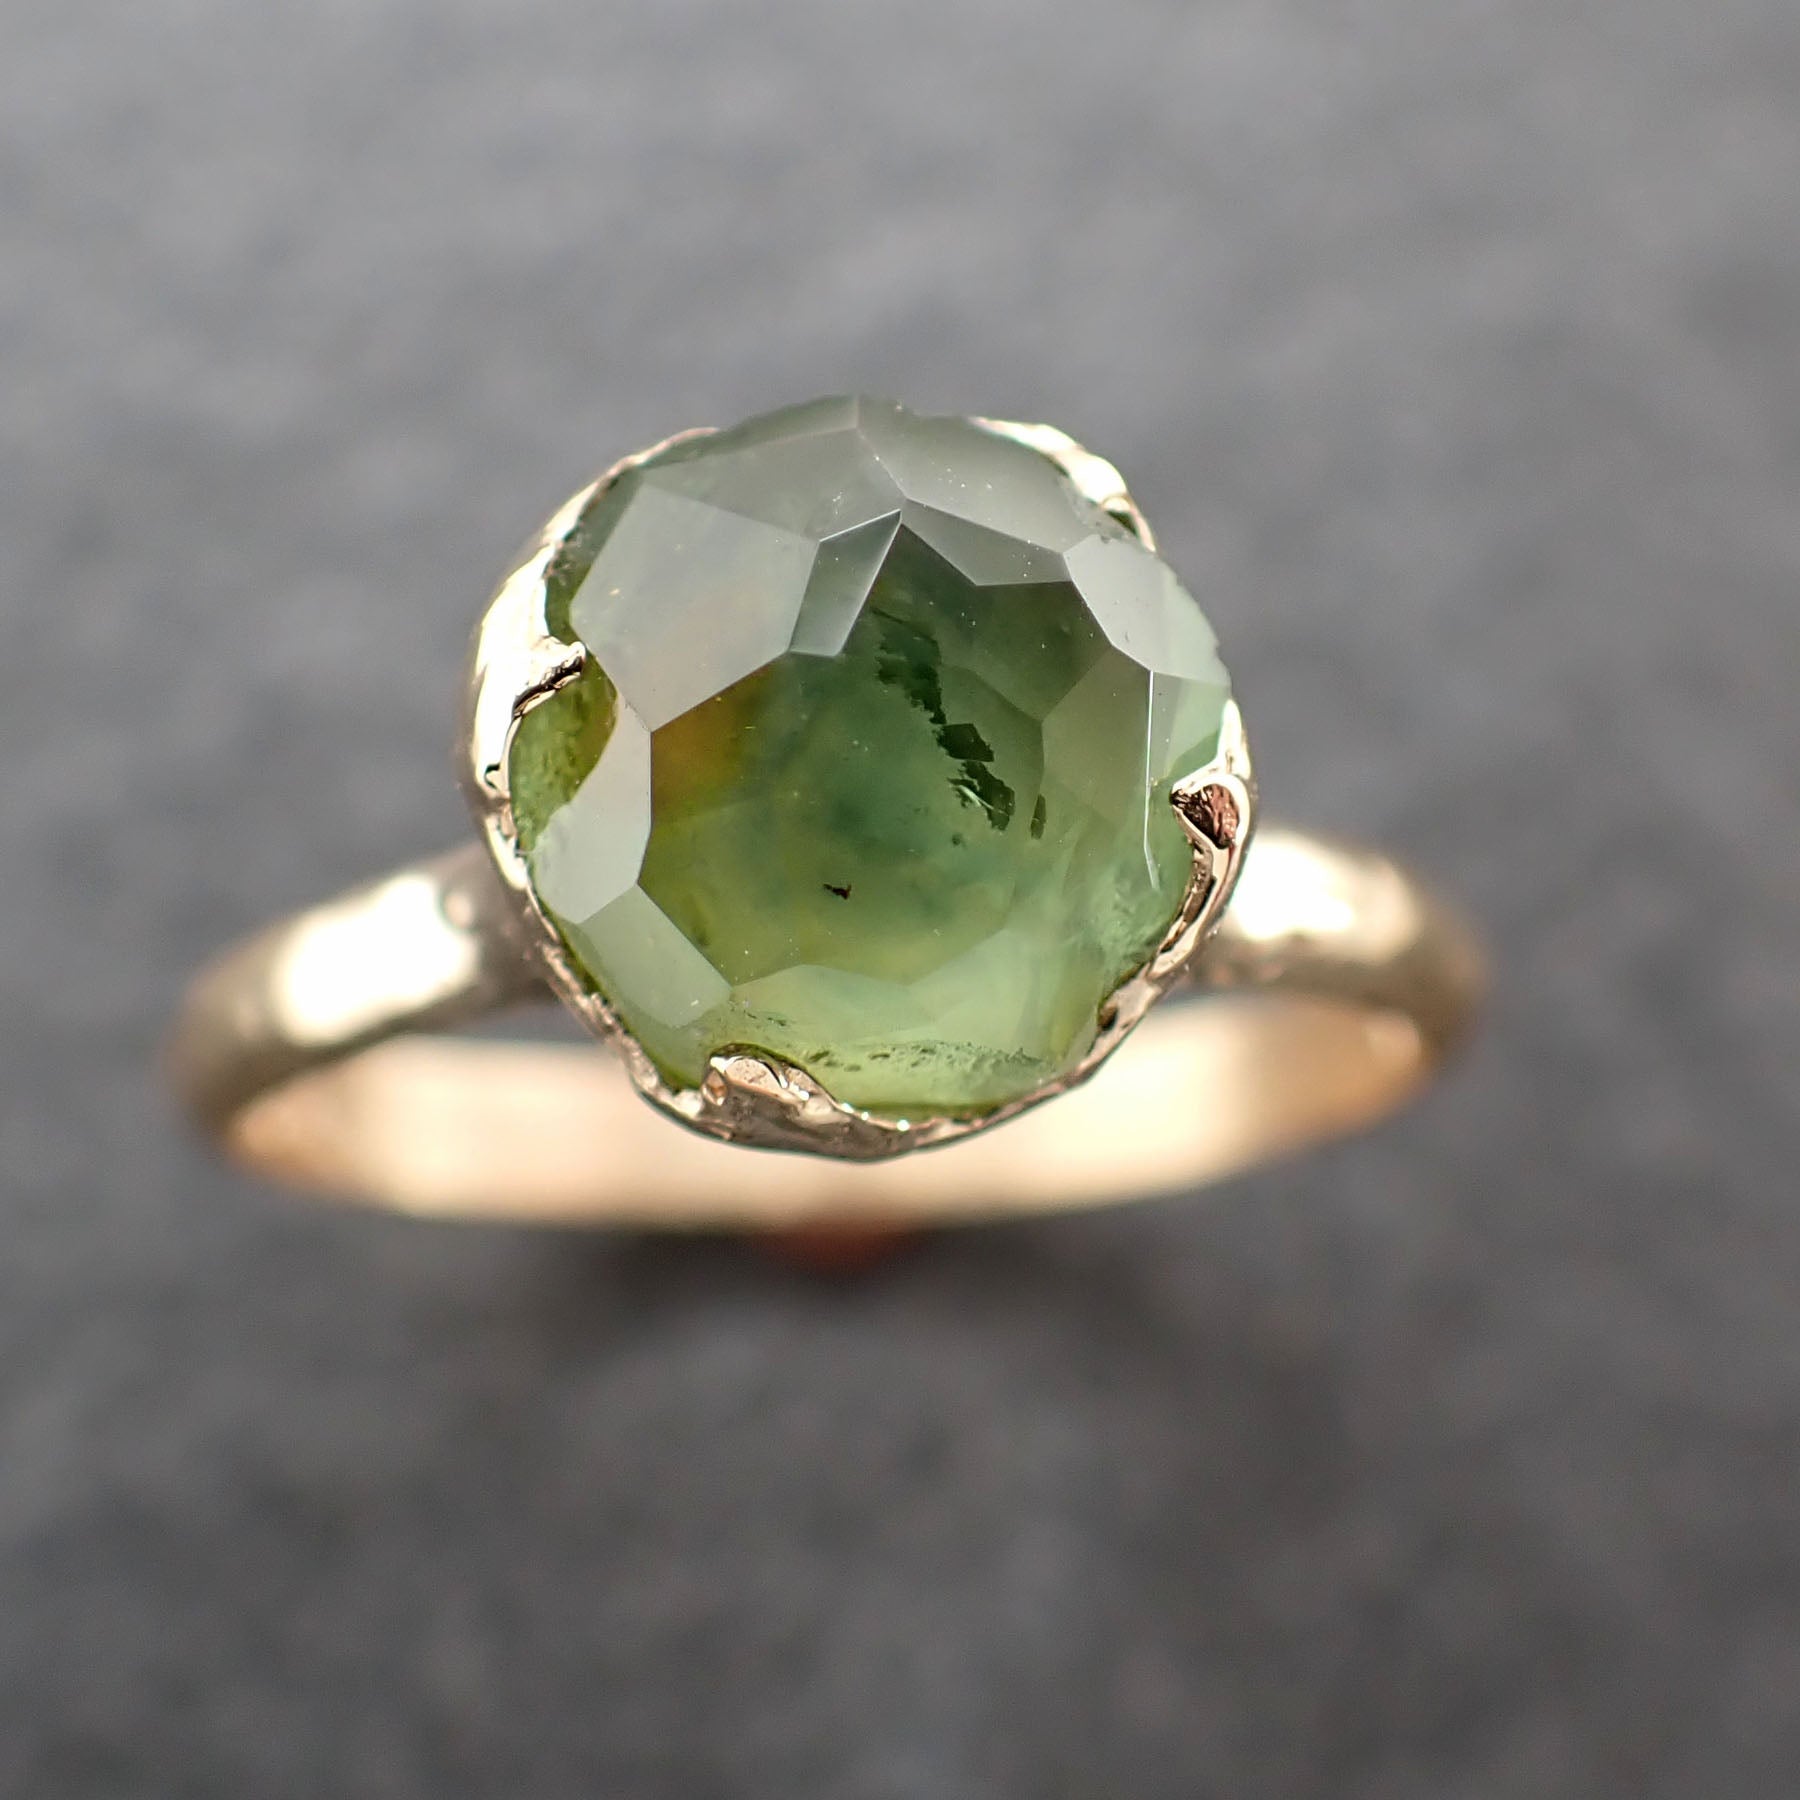 Partially Faceted Green Montana Sapphire Solitaire 18k yellow Gold Engagement Ring Wedding Ring Custom One Of a Kind Gemstone Ring 2398